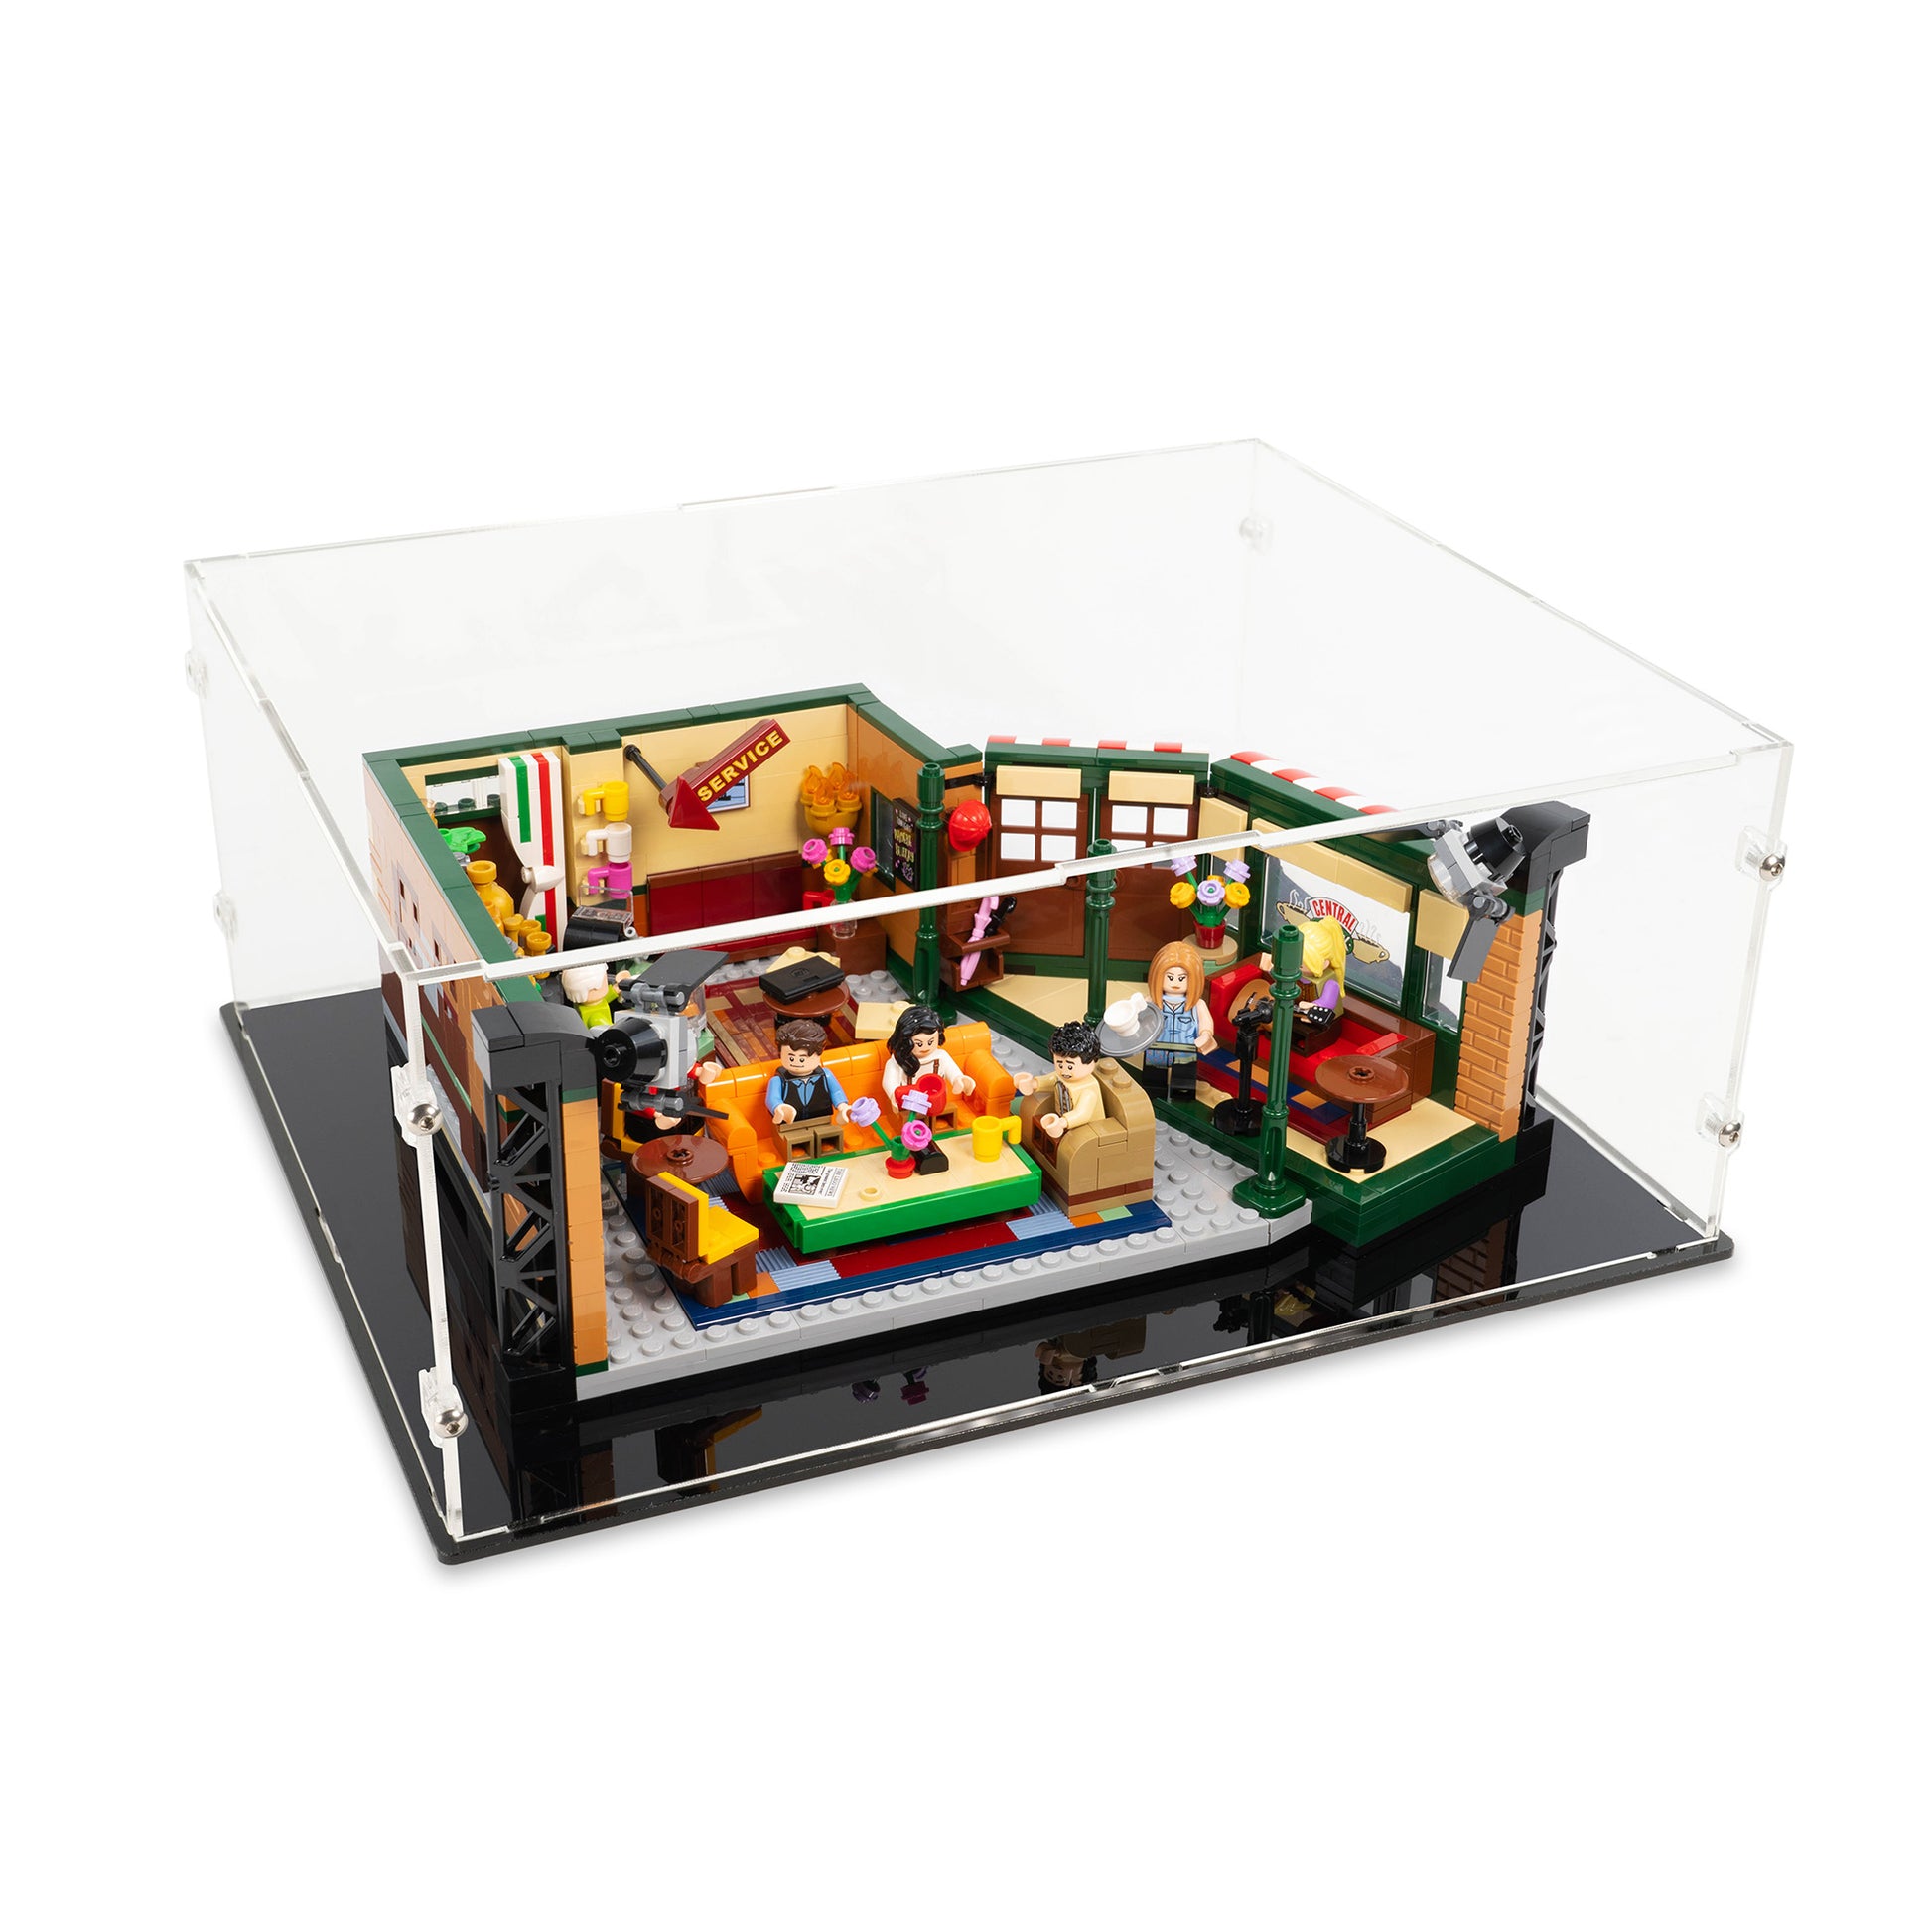 Angled top view of LEGO 21319 Central Perk Display Case.